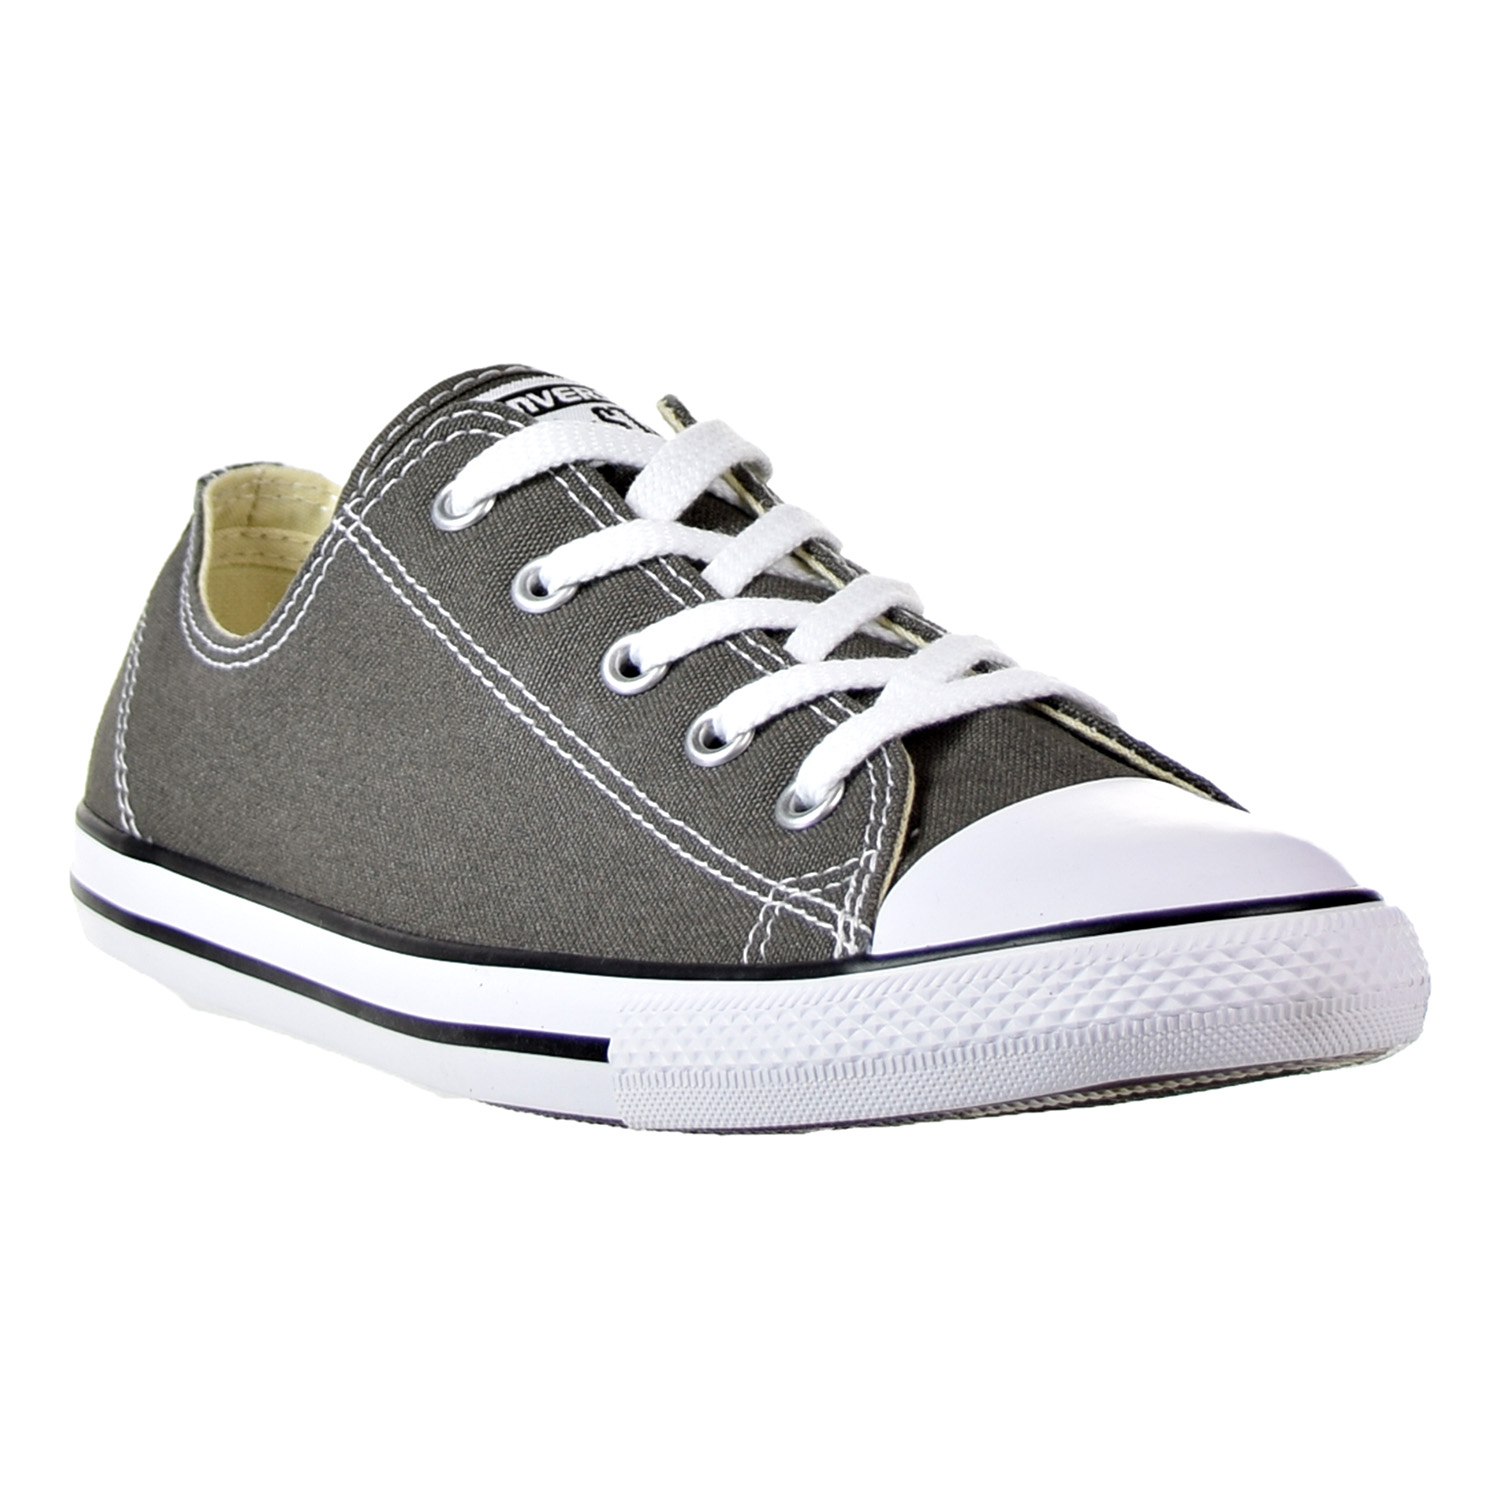 Converse Chuck Taylor All Star Dainty Ox Women's Shoes Charcoal 532353f (5 B(M) US)